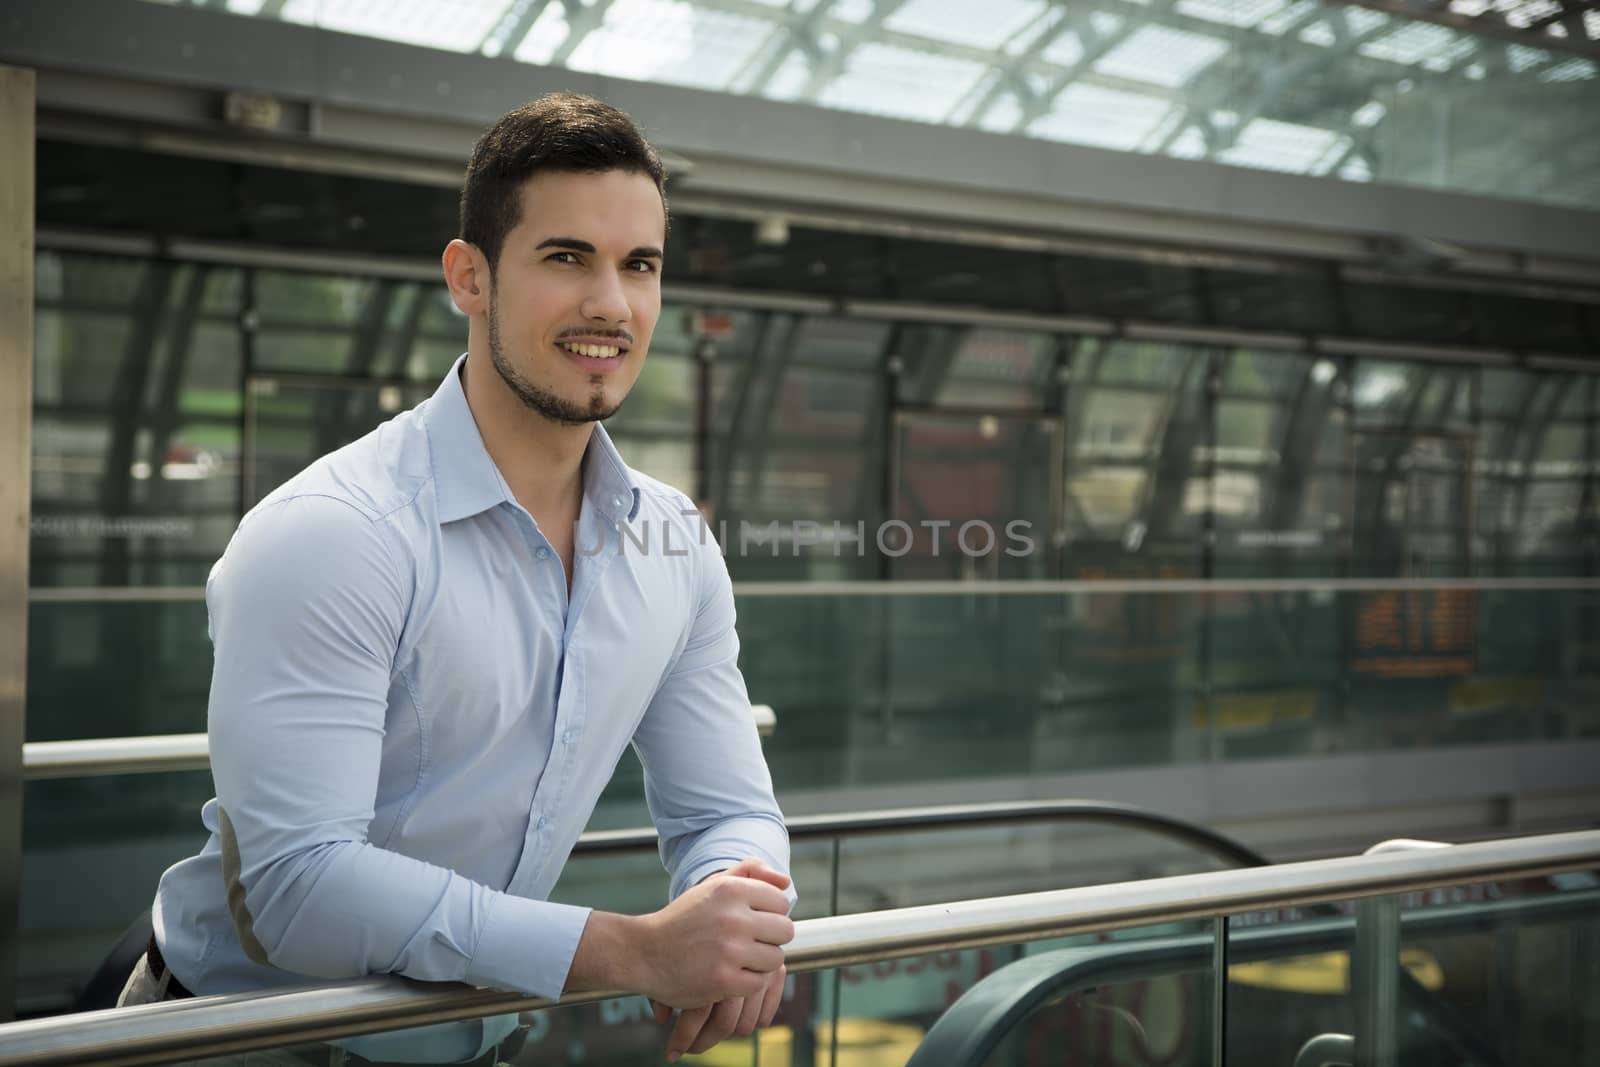 Handsome young man in train station or airport looking at camera and smiling